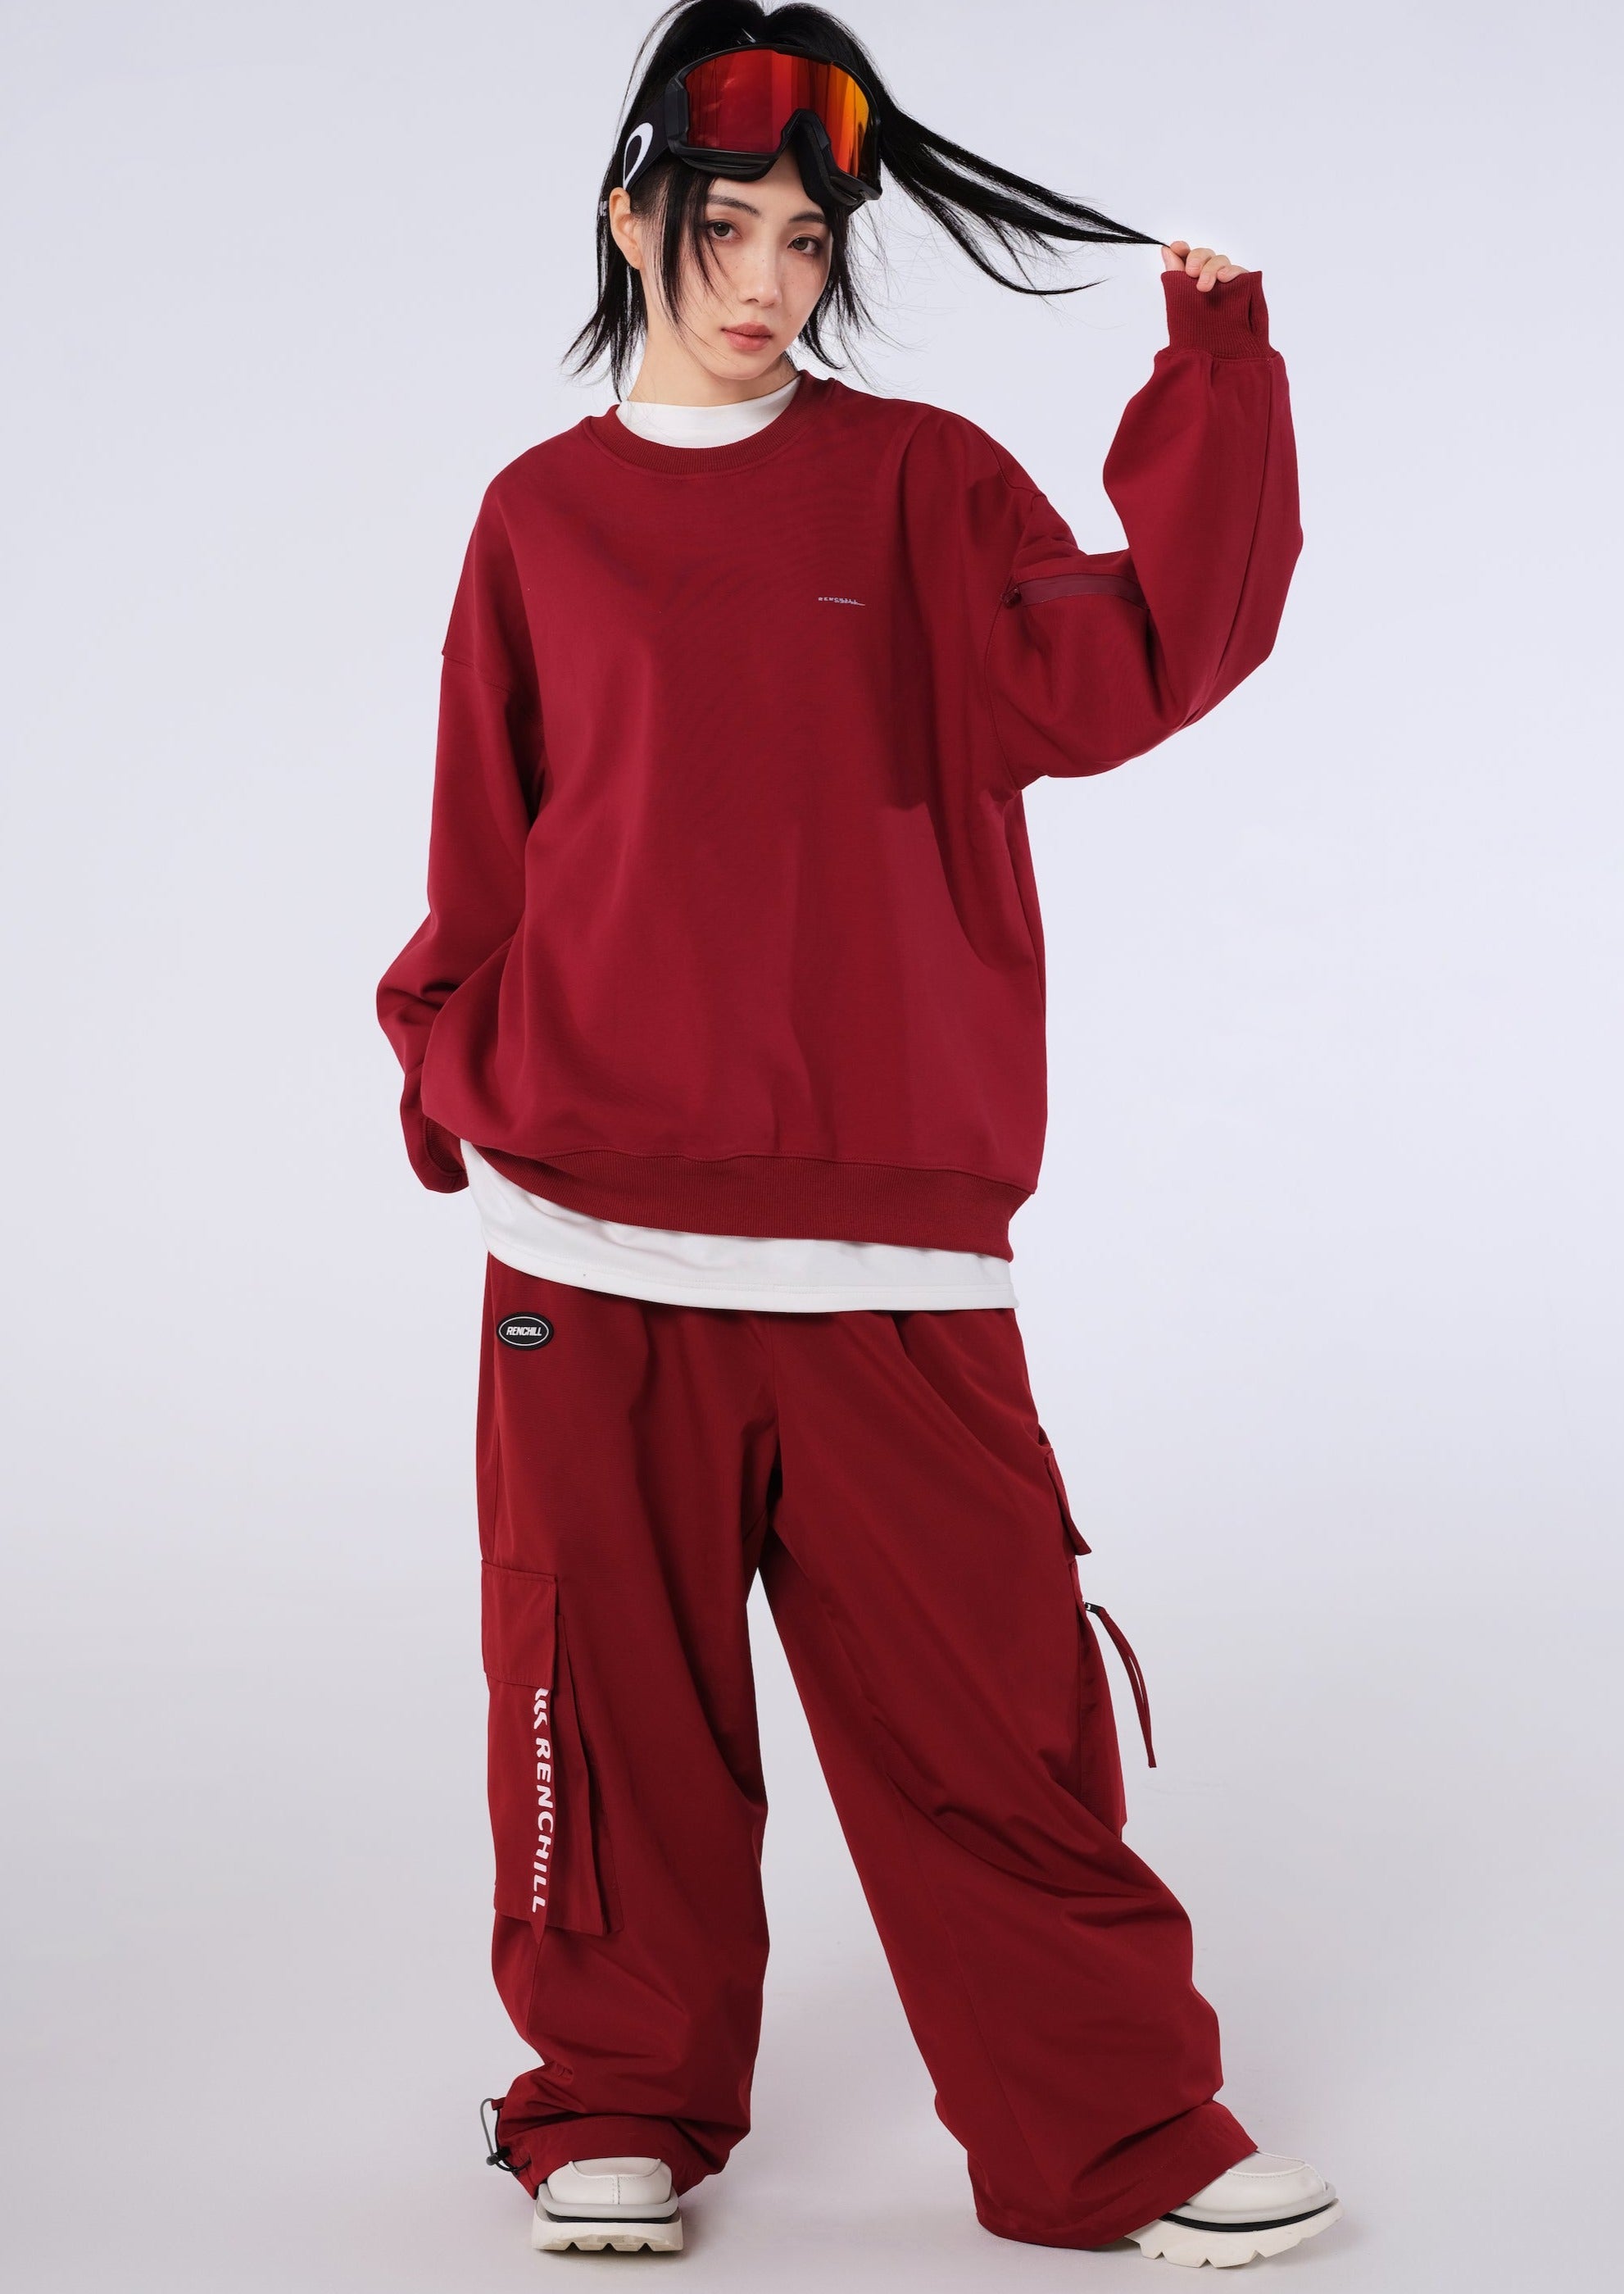 RenChill Wine Red Baggy Ski Snowboard Pants